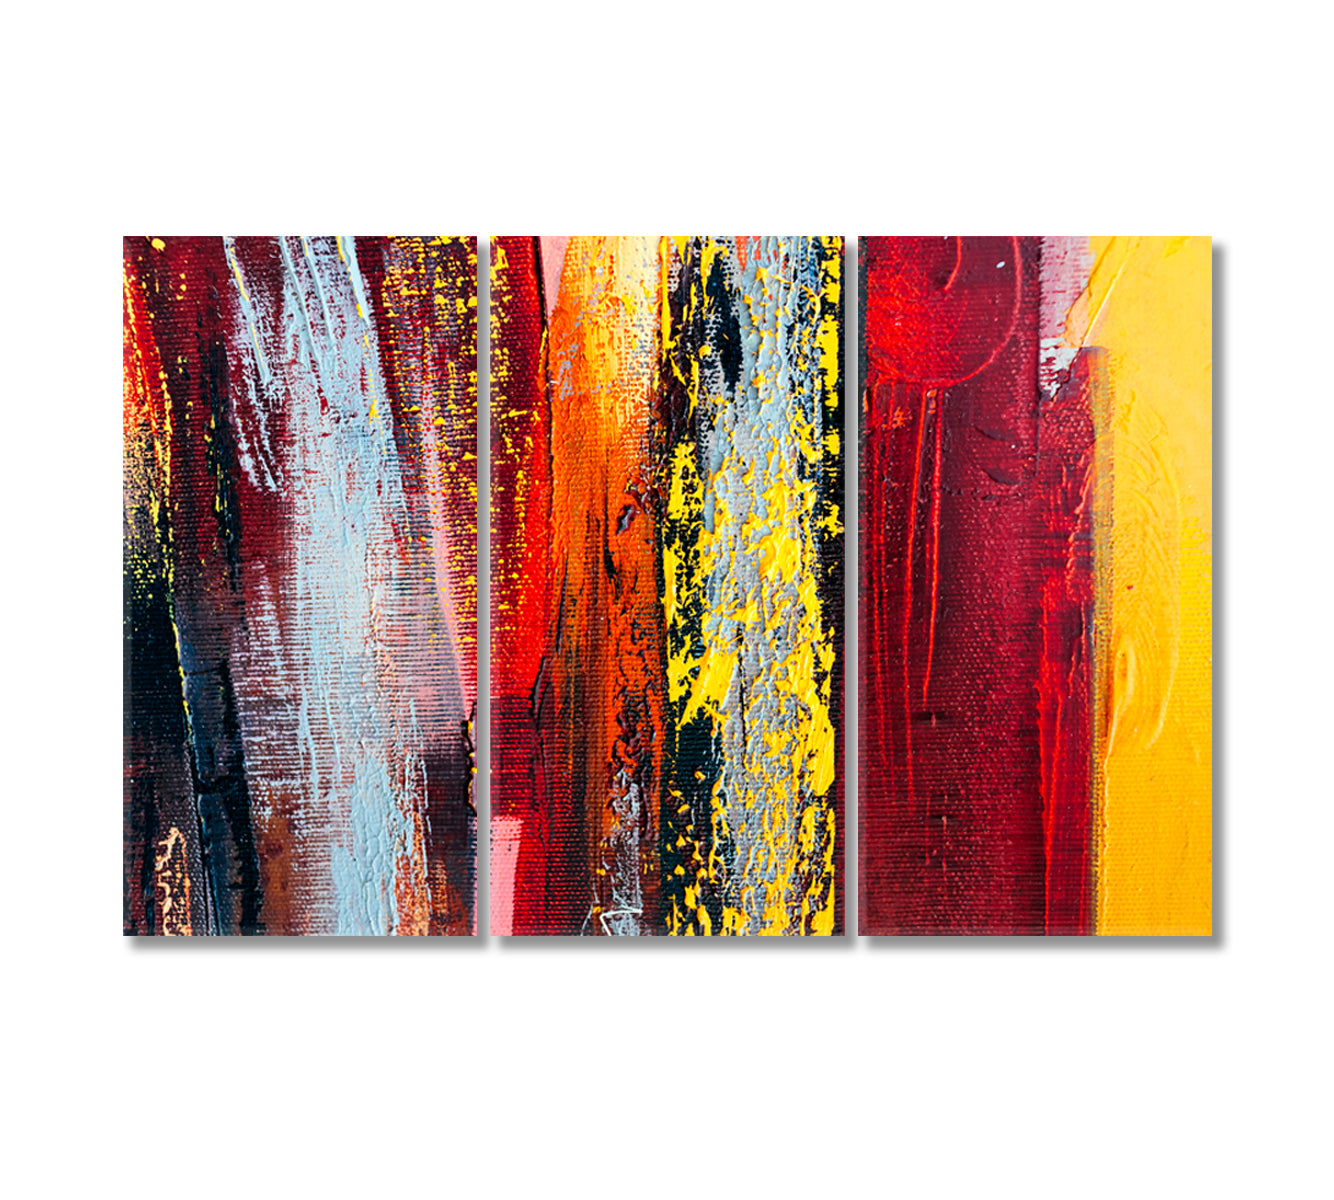 Colorful Abstract Oil Brush Strokes Canvas Print-Canvas Print-CetArt-3 Panels-36x24 inches-CetArt